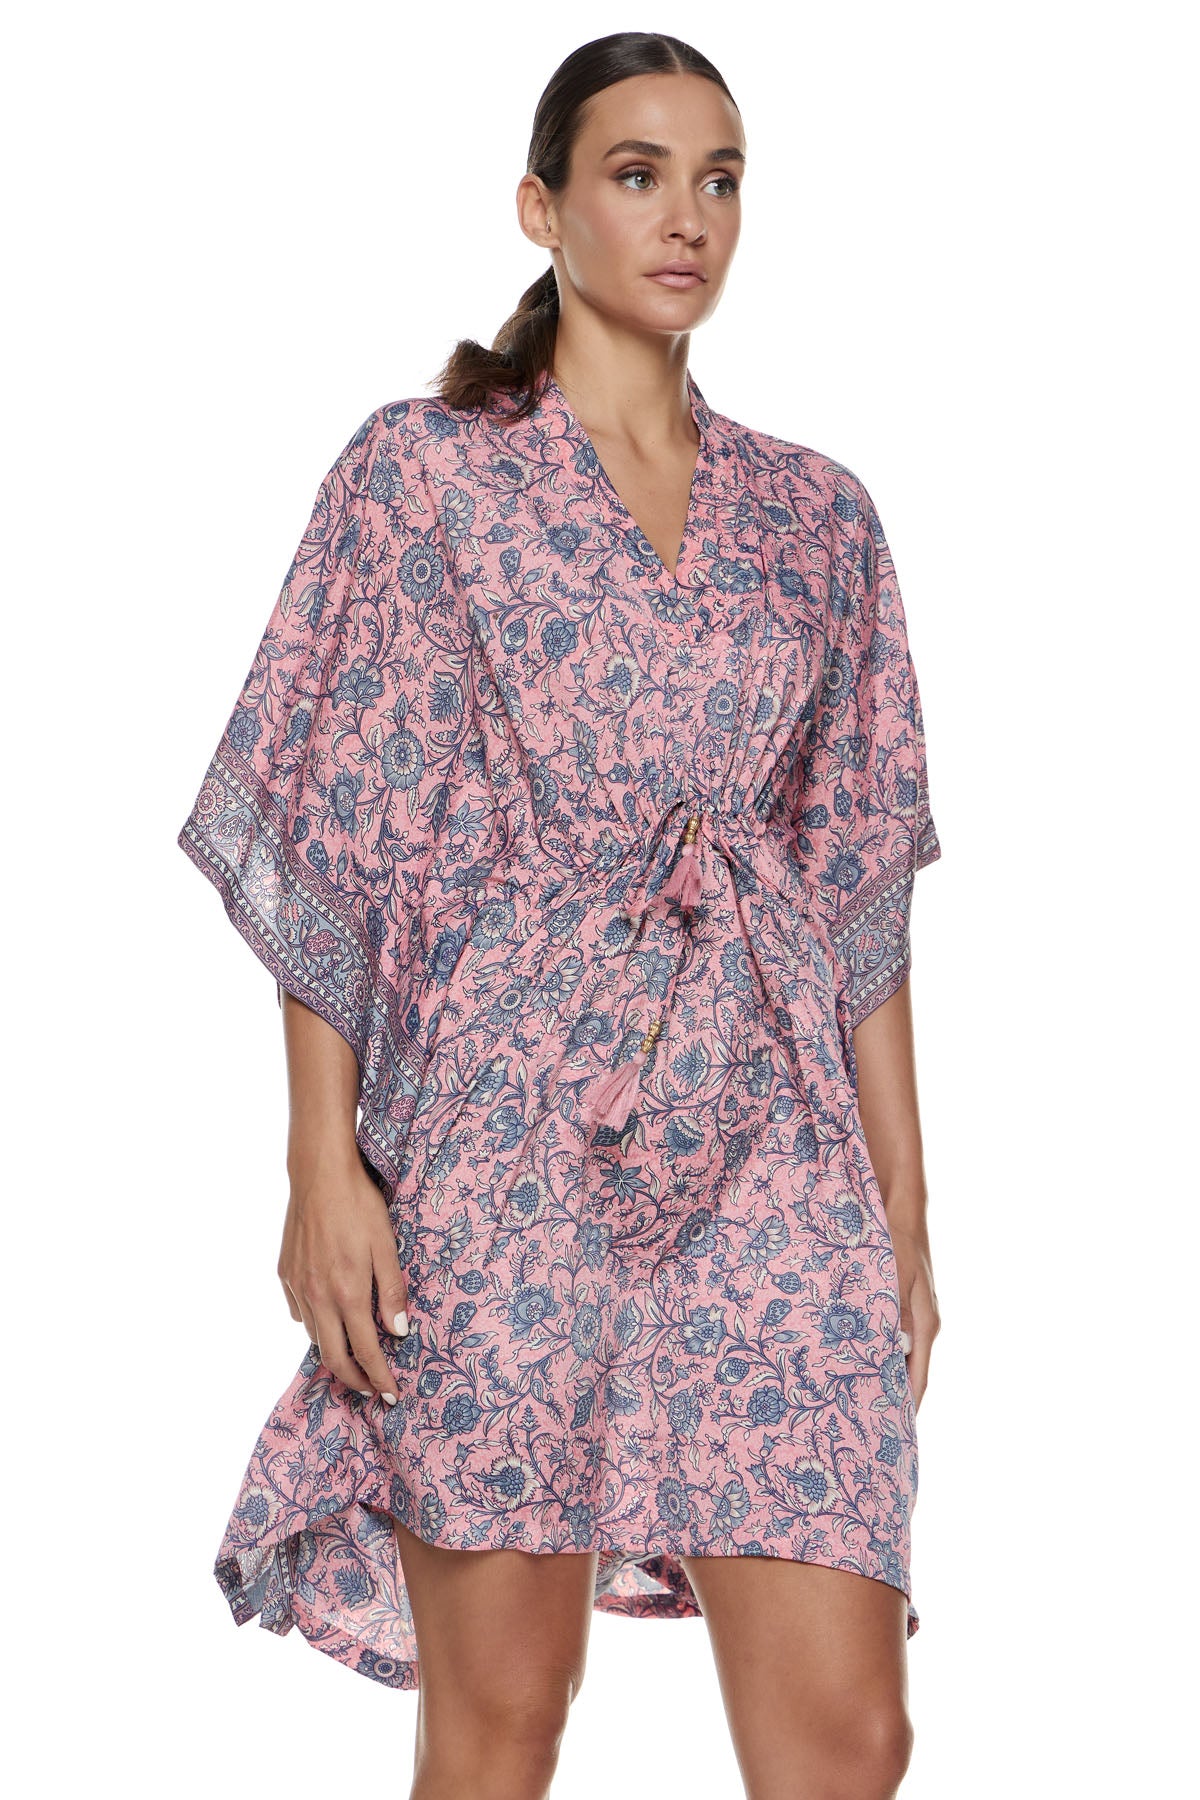 Chic & Simple Lola Kaftan Shirt - Pink with Blue Floral Knowmad